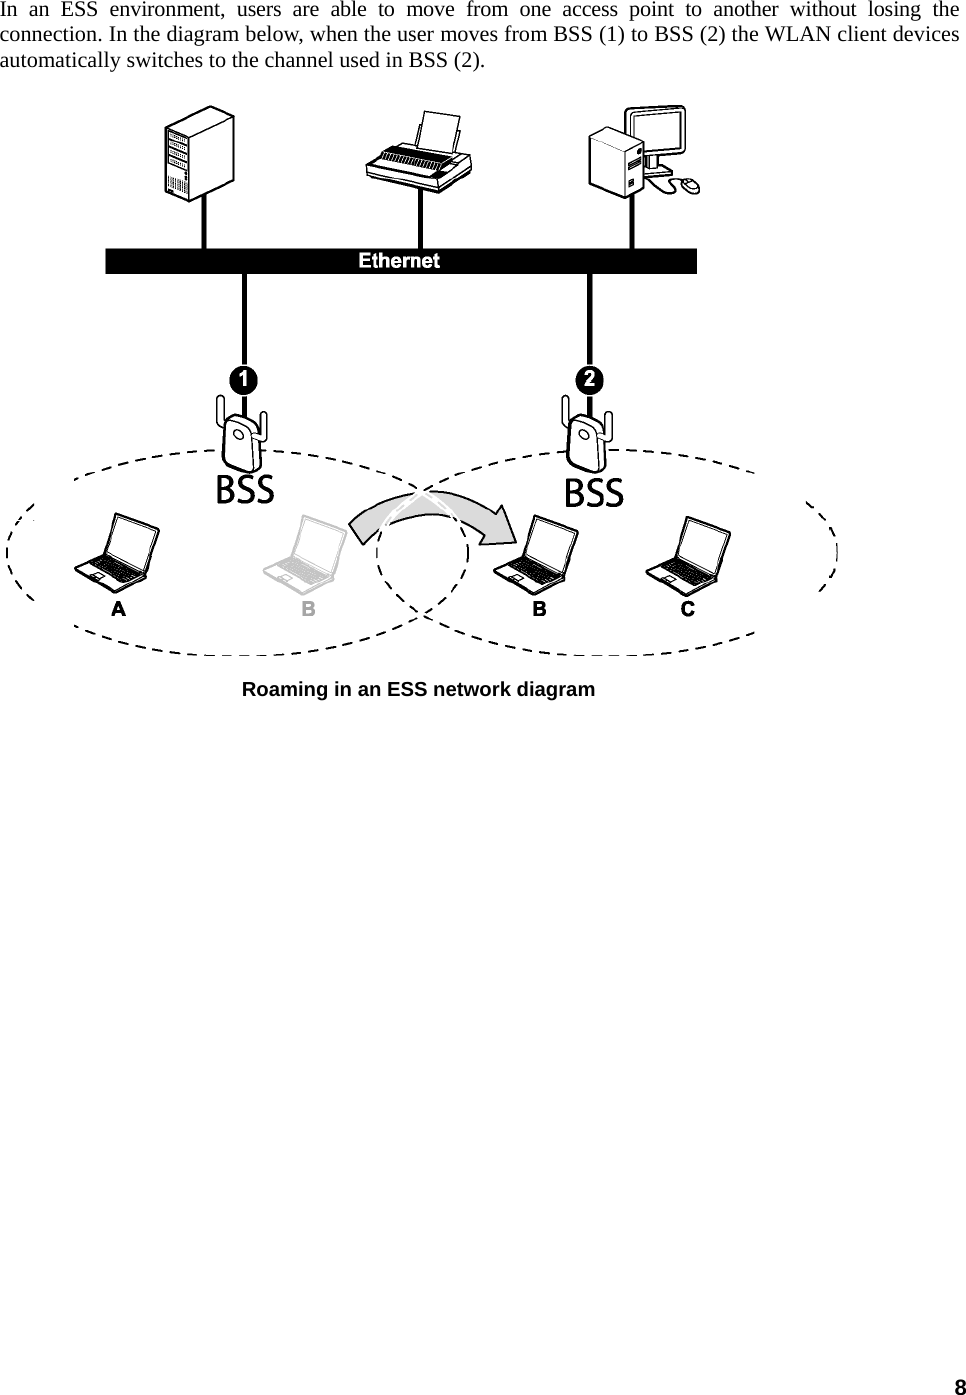 8 In an ESS environment, users are able to move from one access point to another without losing the connection. In the diagram below, when the user moves from BSS (1) to BSS (2) the WLAN client devices automatically switches to the channel used in BSS (2).     Roaming in an ESS network diagram 